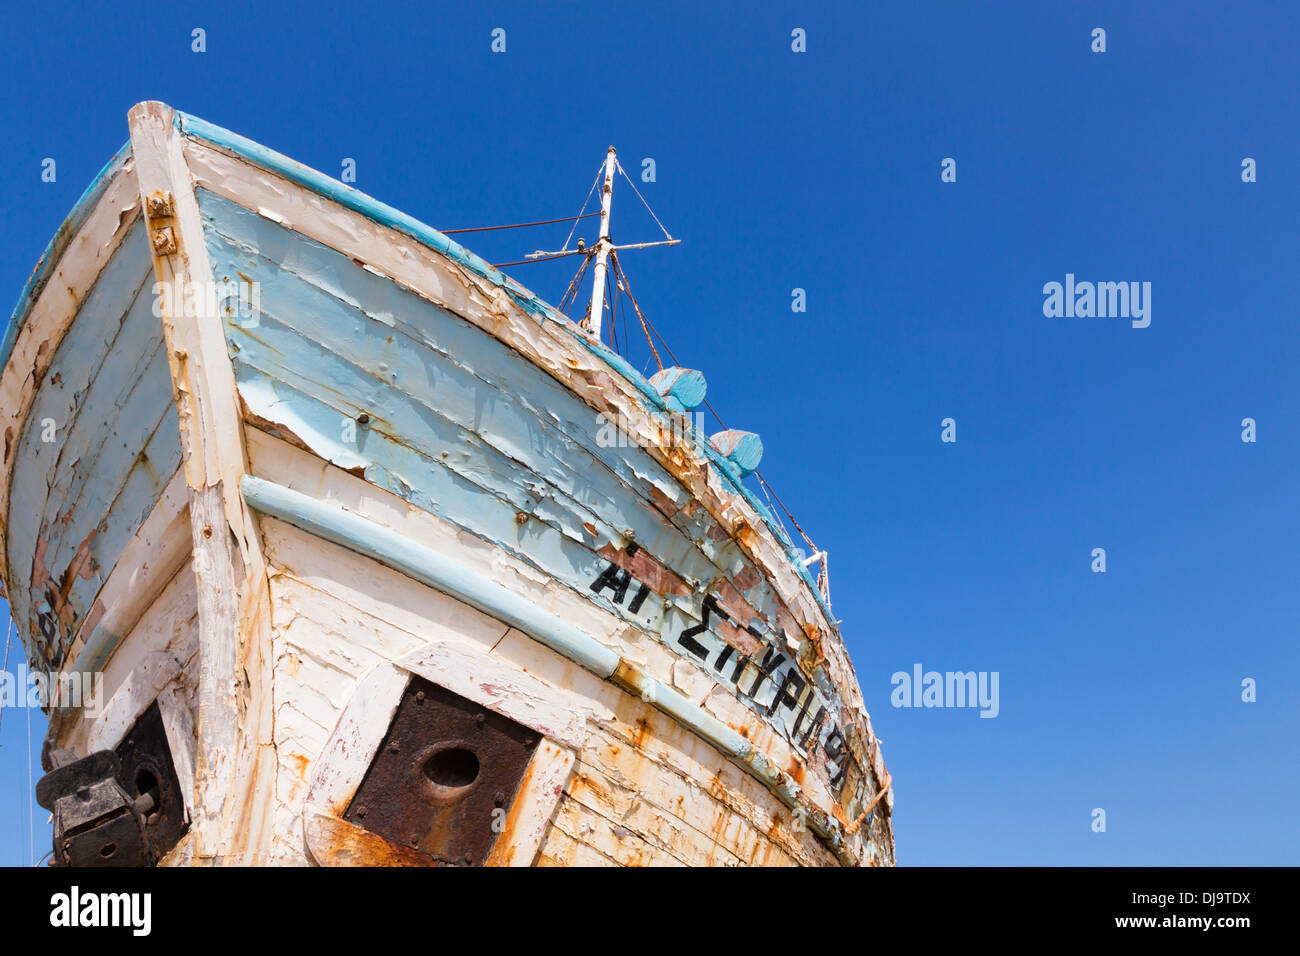 traditional old Greek caique fishing boat in Polis Harbour, Latchi, Cyprus. Stock Photo